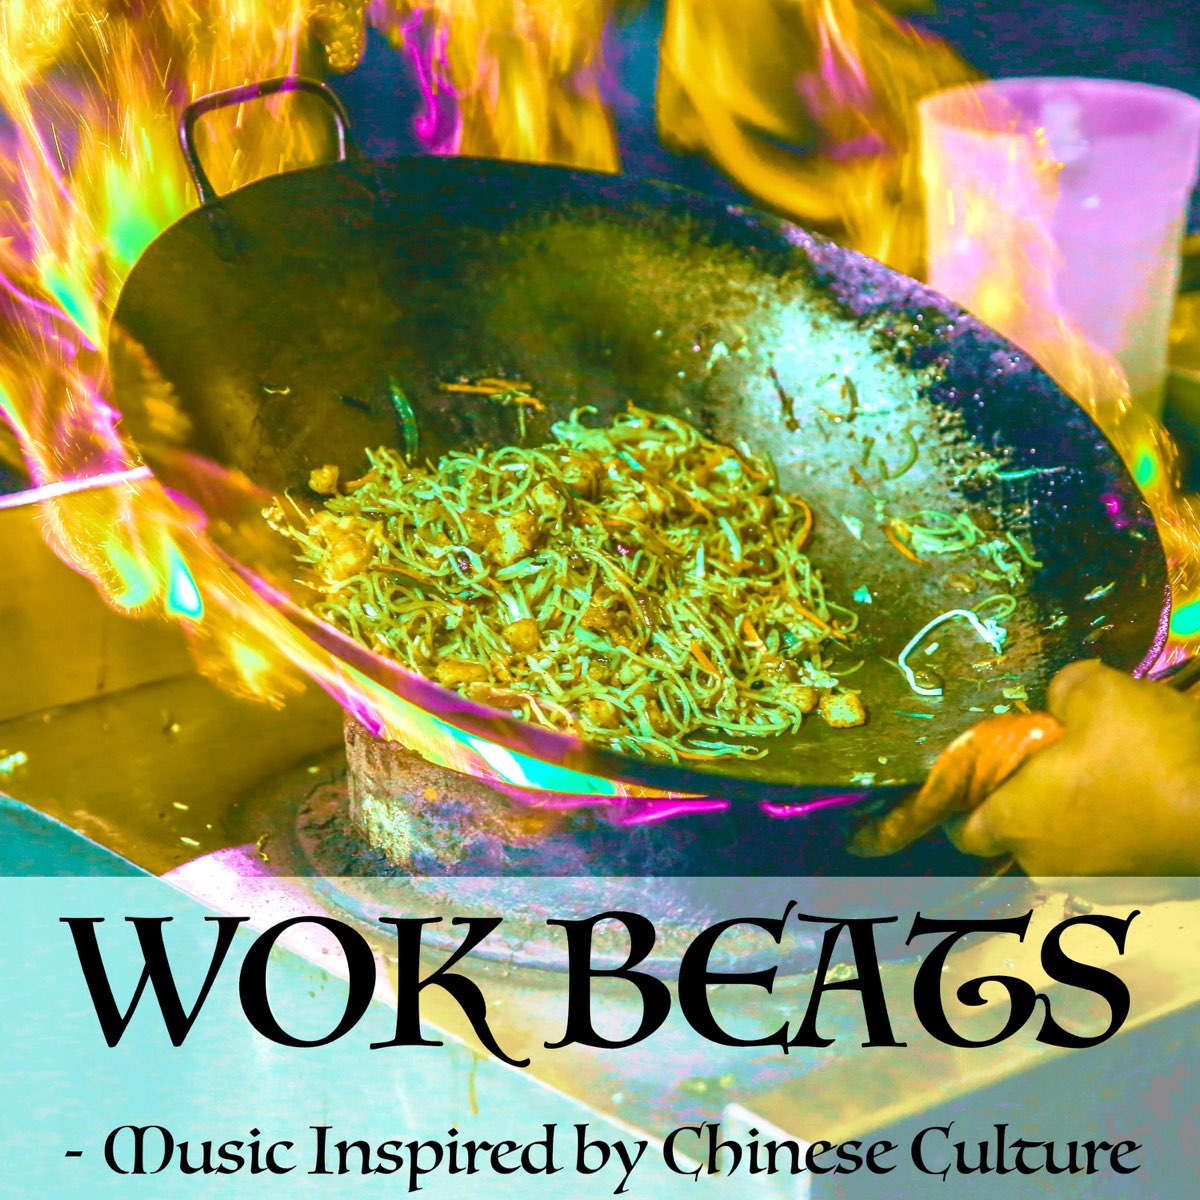 Wok Beats - Music Inspired by Chinese Culture – Album par Golden Dragon,  Bamboo & Young Panda – Apple Music